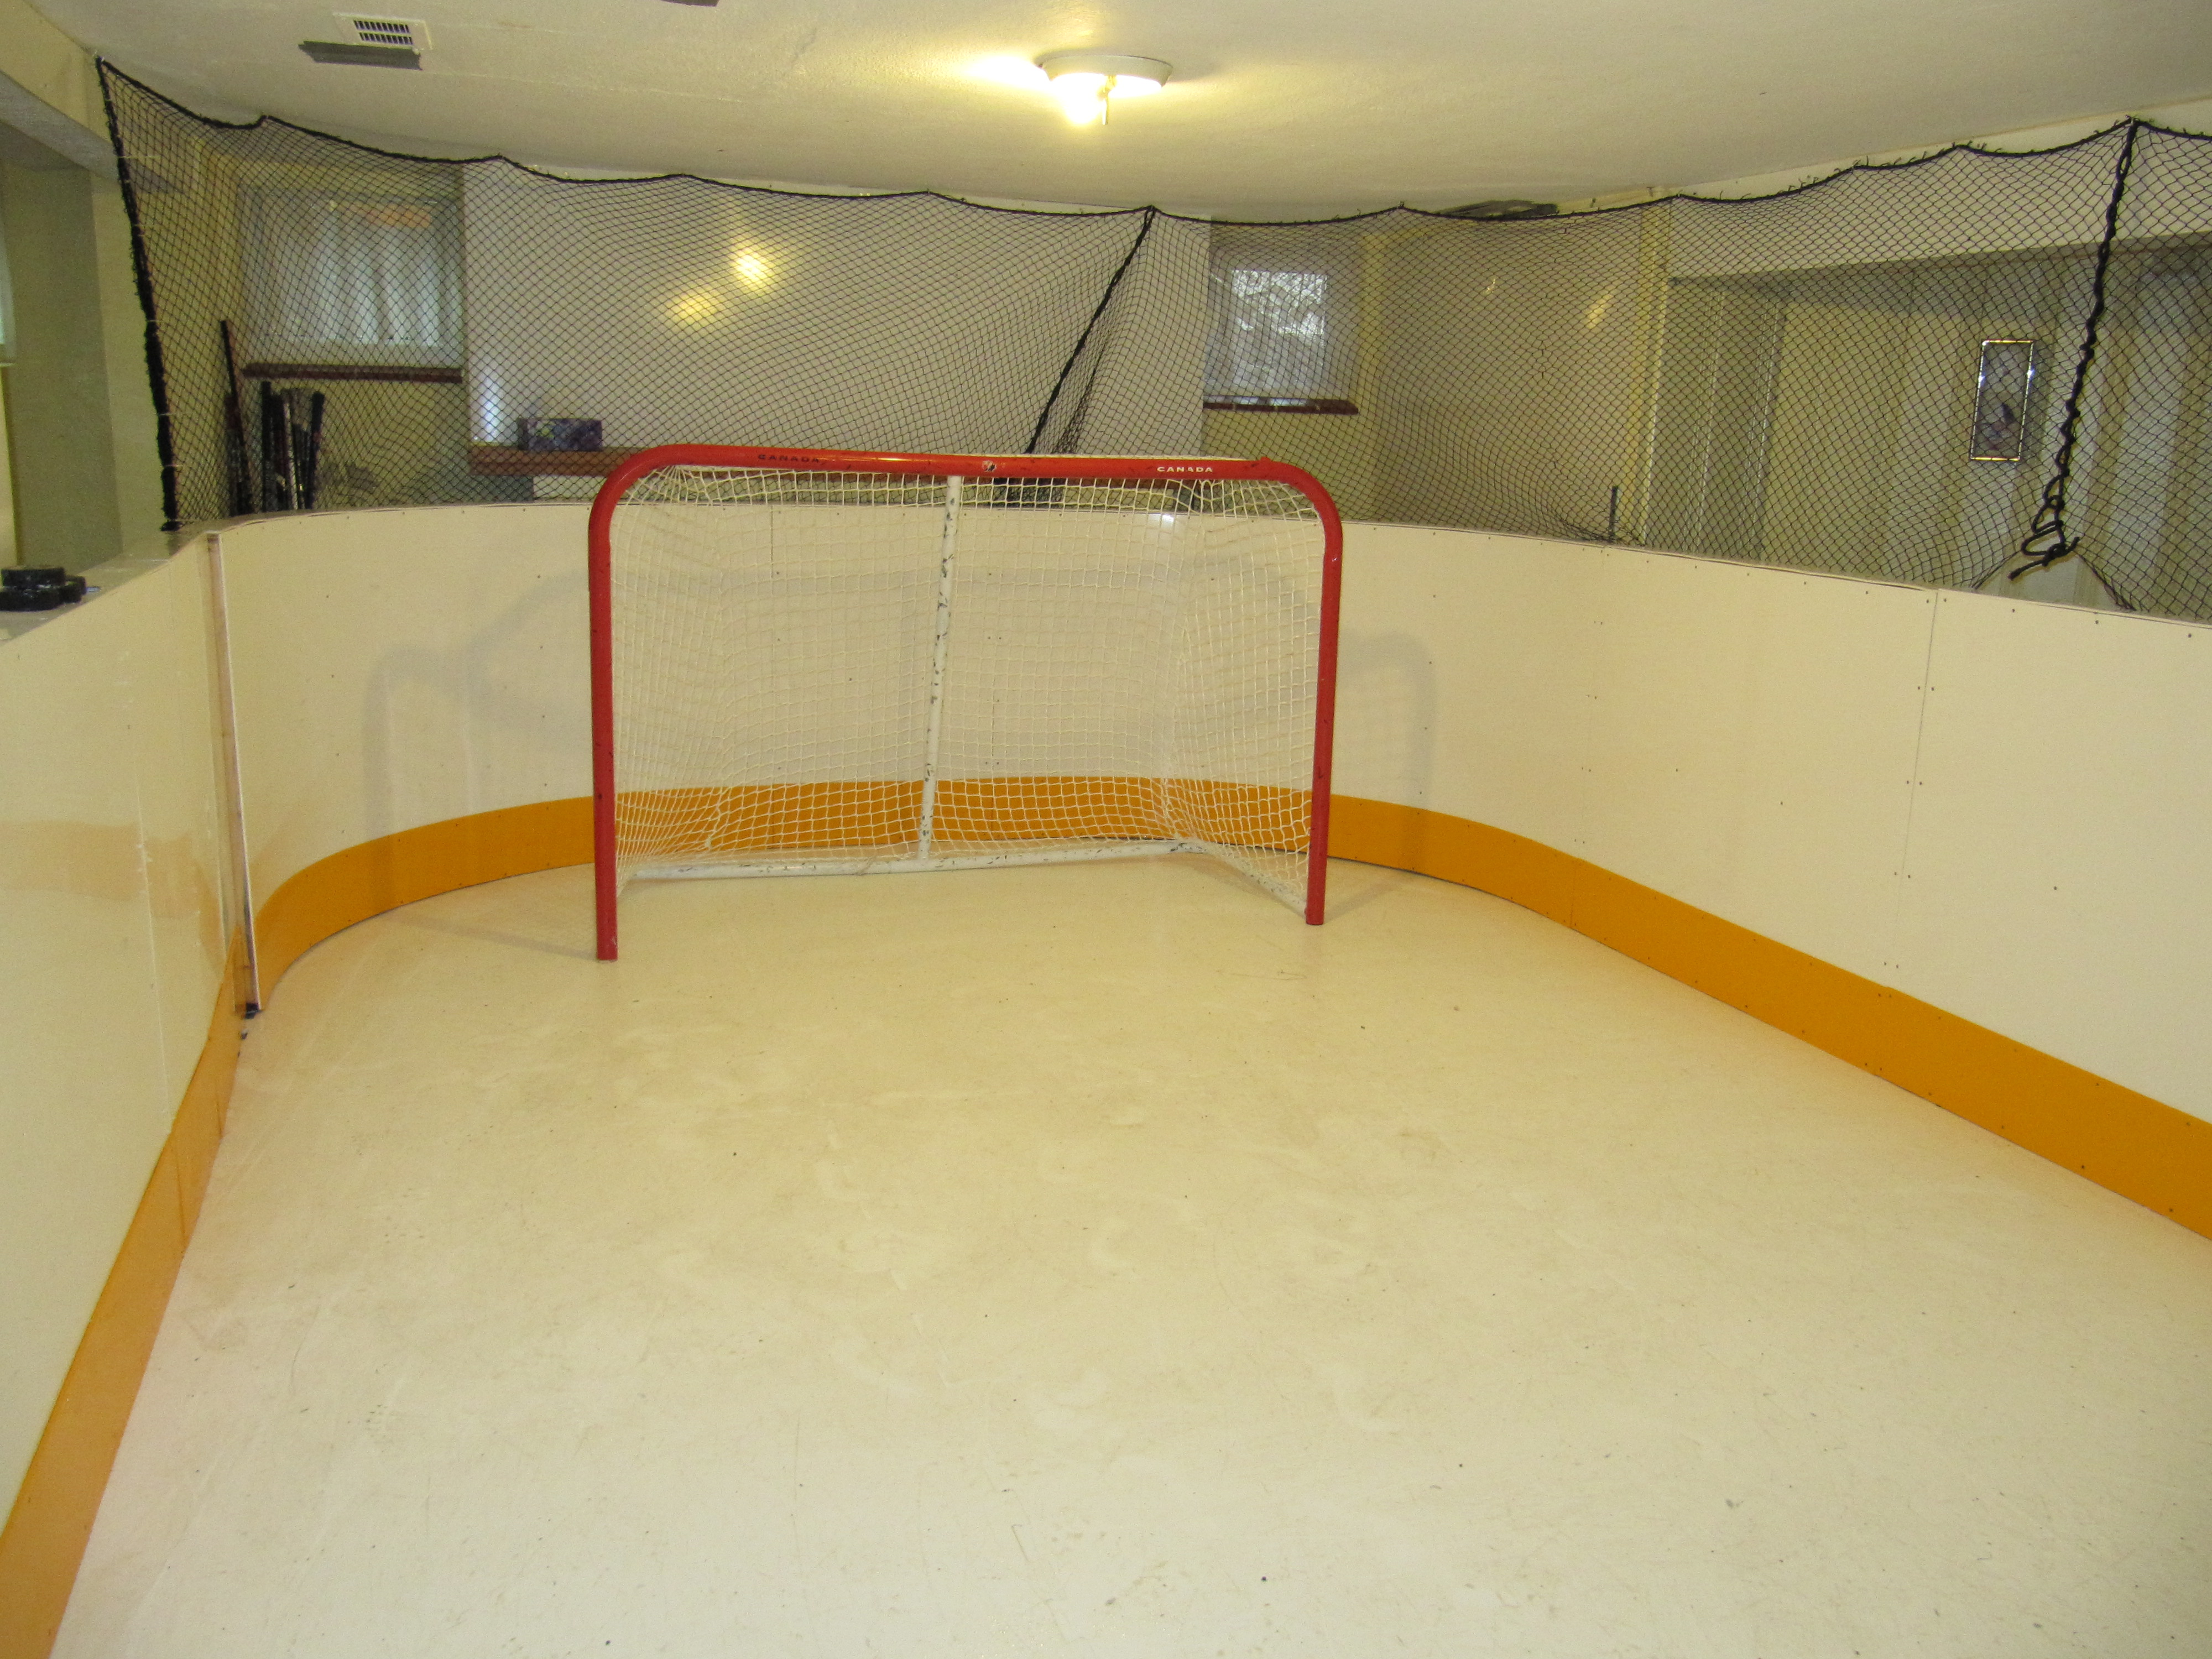 synthetic-ice-basement-synthetic-ice-for-skating - My ...